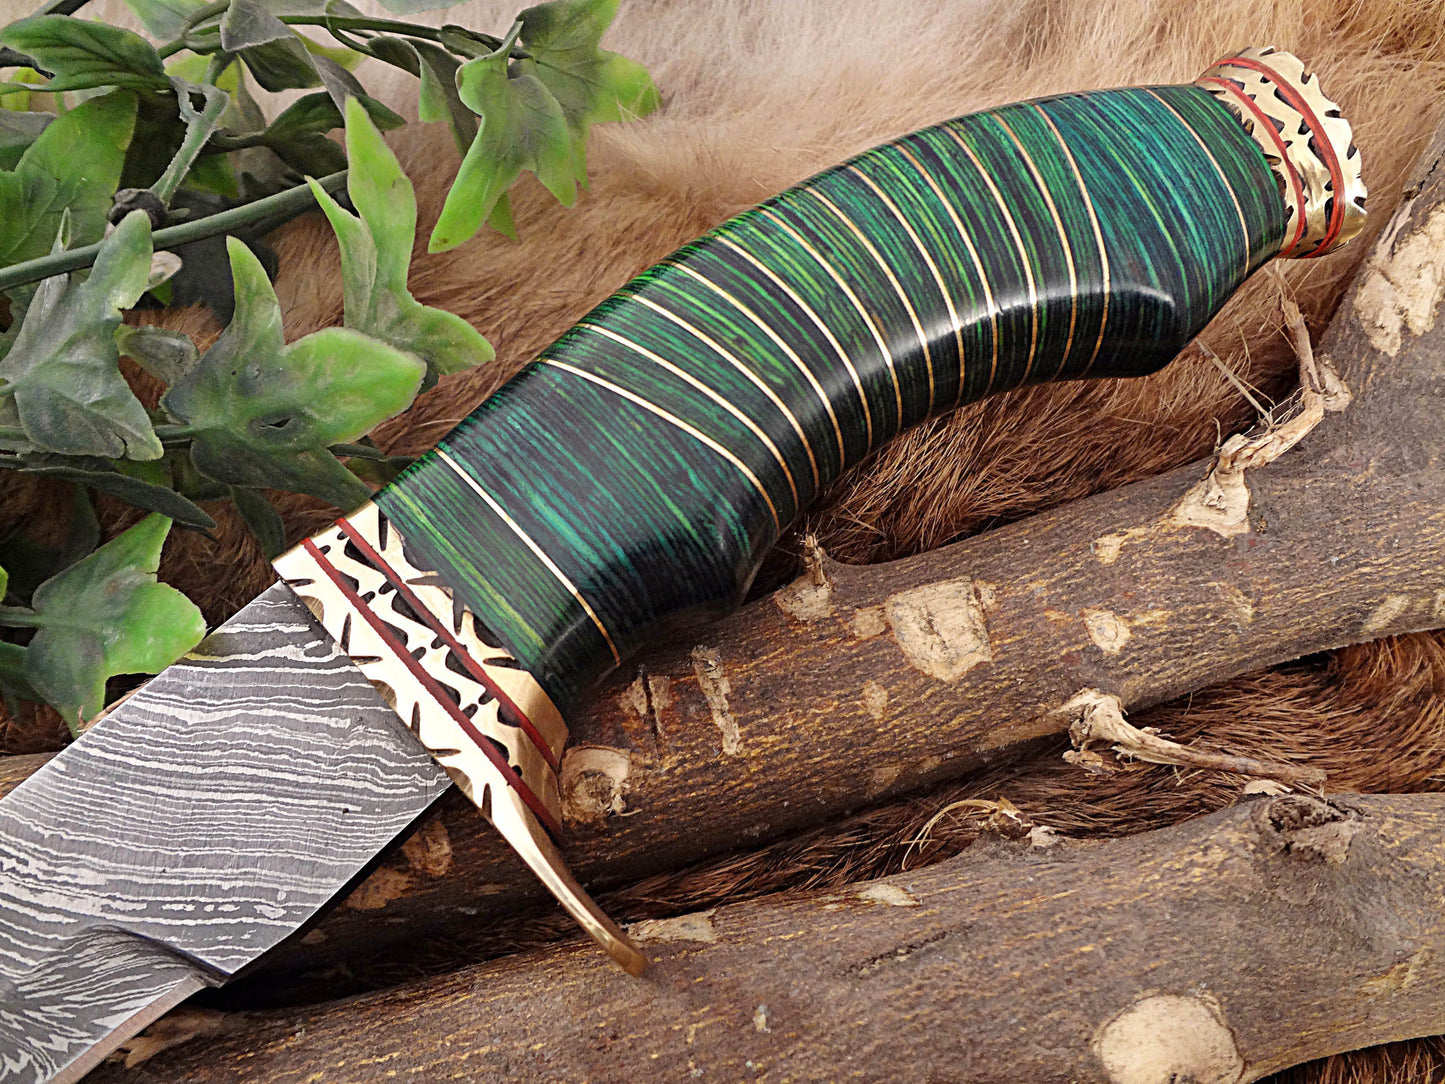 Damascus Steel Kukri Knife 15 Inches custom made Hand Forged With 10" long blade, Green wood with engraved brass scale, Cow Leather Sheath